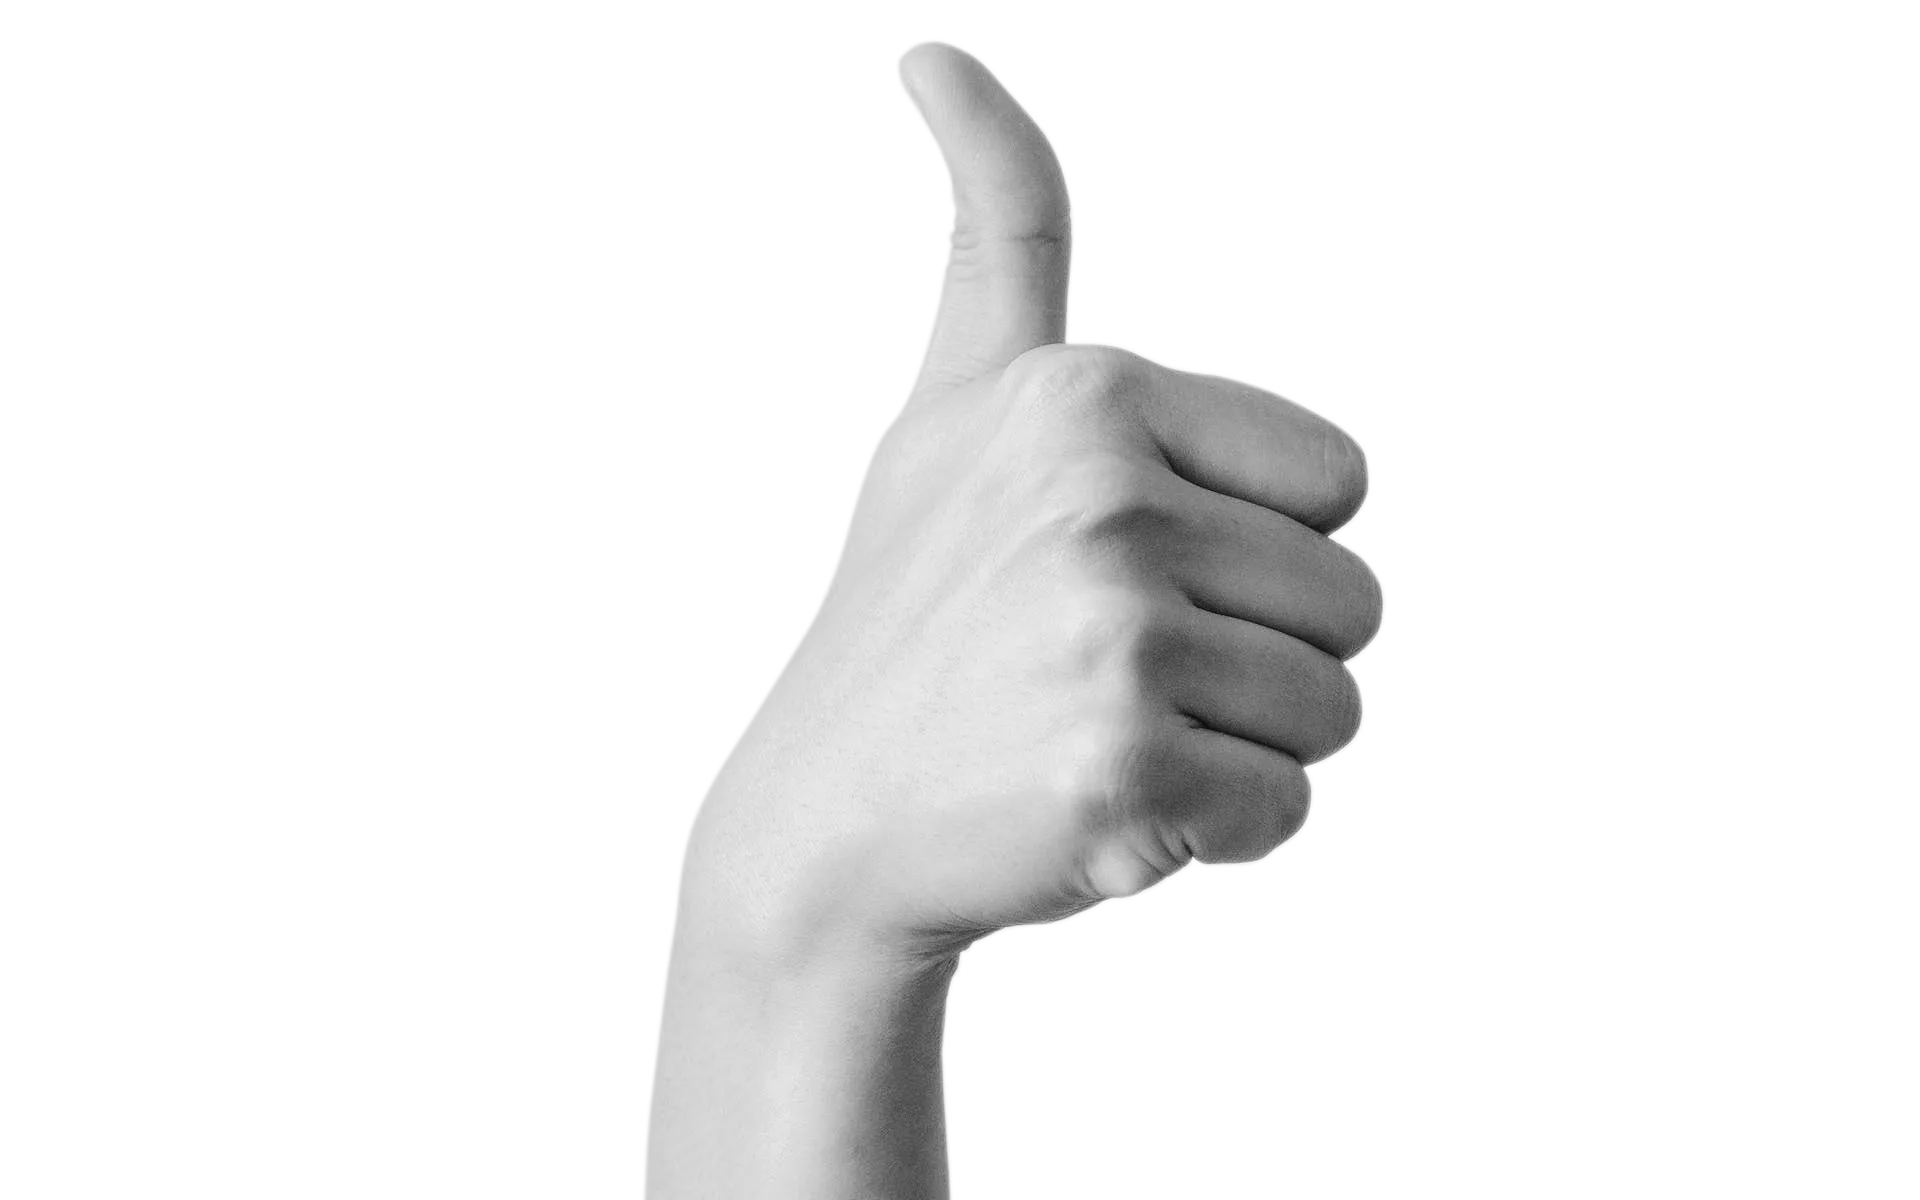 a thumbs up of approval